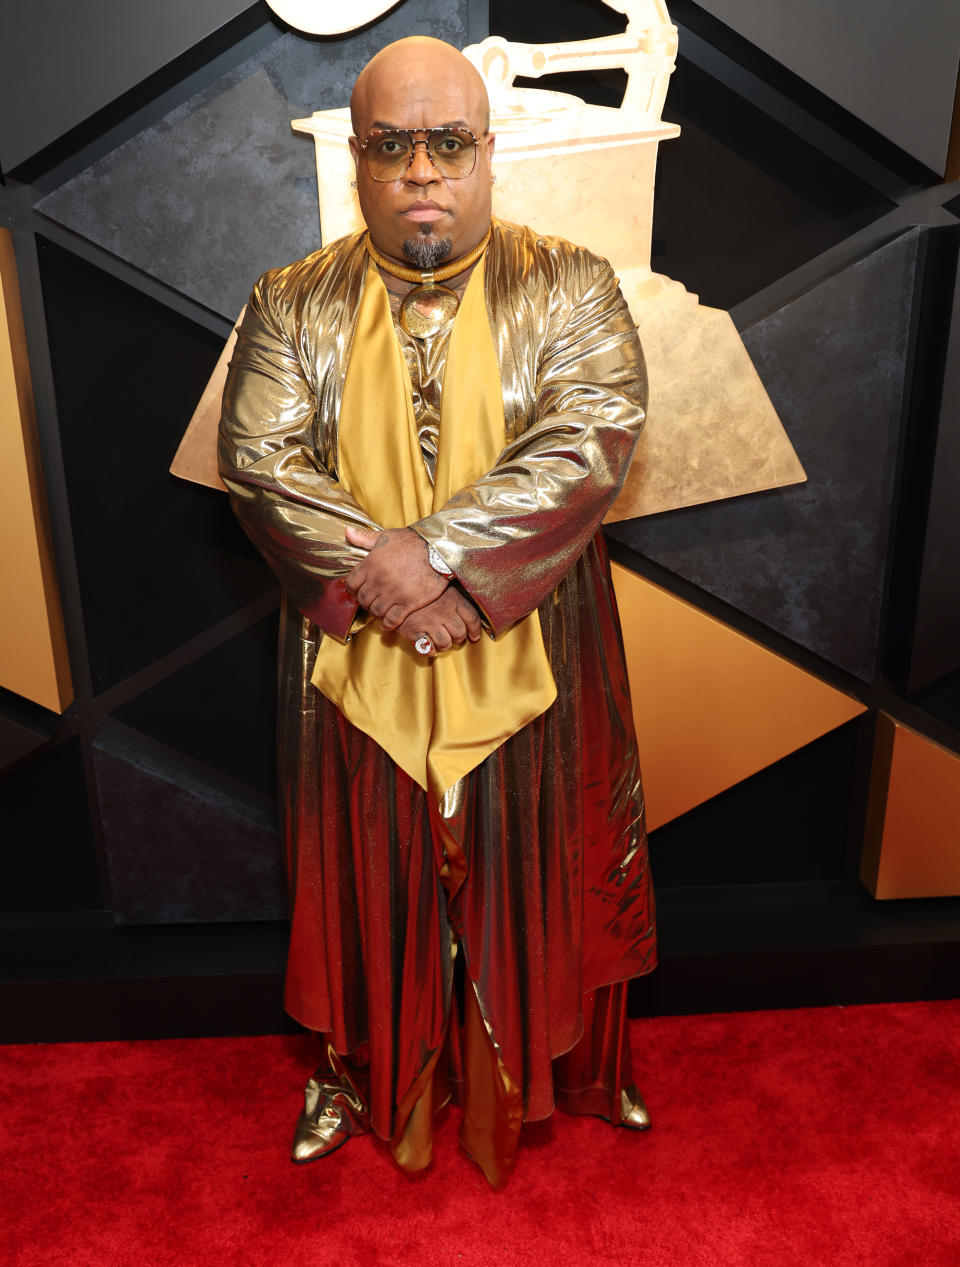 LOS ANGELES, CALIFORNIA - FEBRUARY 04: CeeLo Green attends the 66th GRAMMY Awards at Crypto.com Arena on February 04, 2024 in Los Angeles, California. (Photo by Kevin Mazur/Getty Images for The Recording Academy)